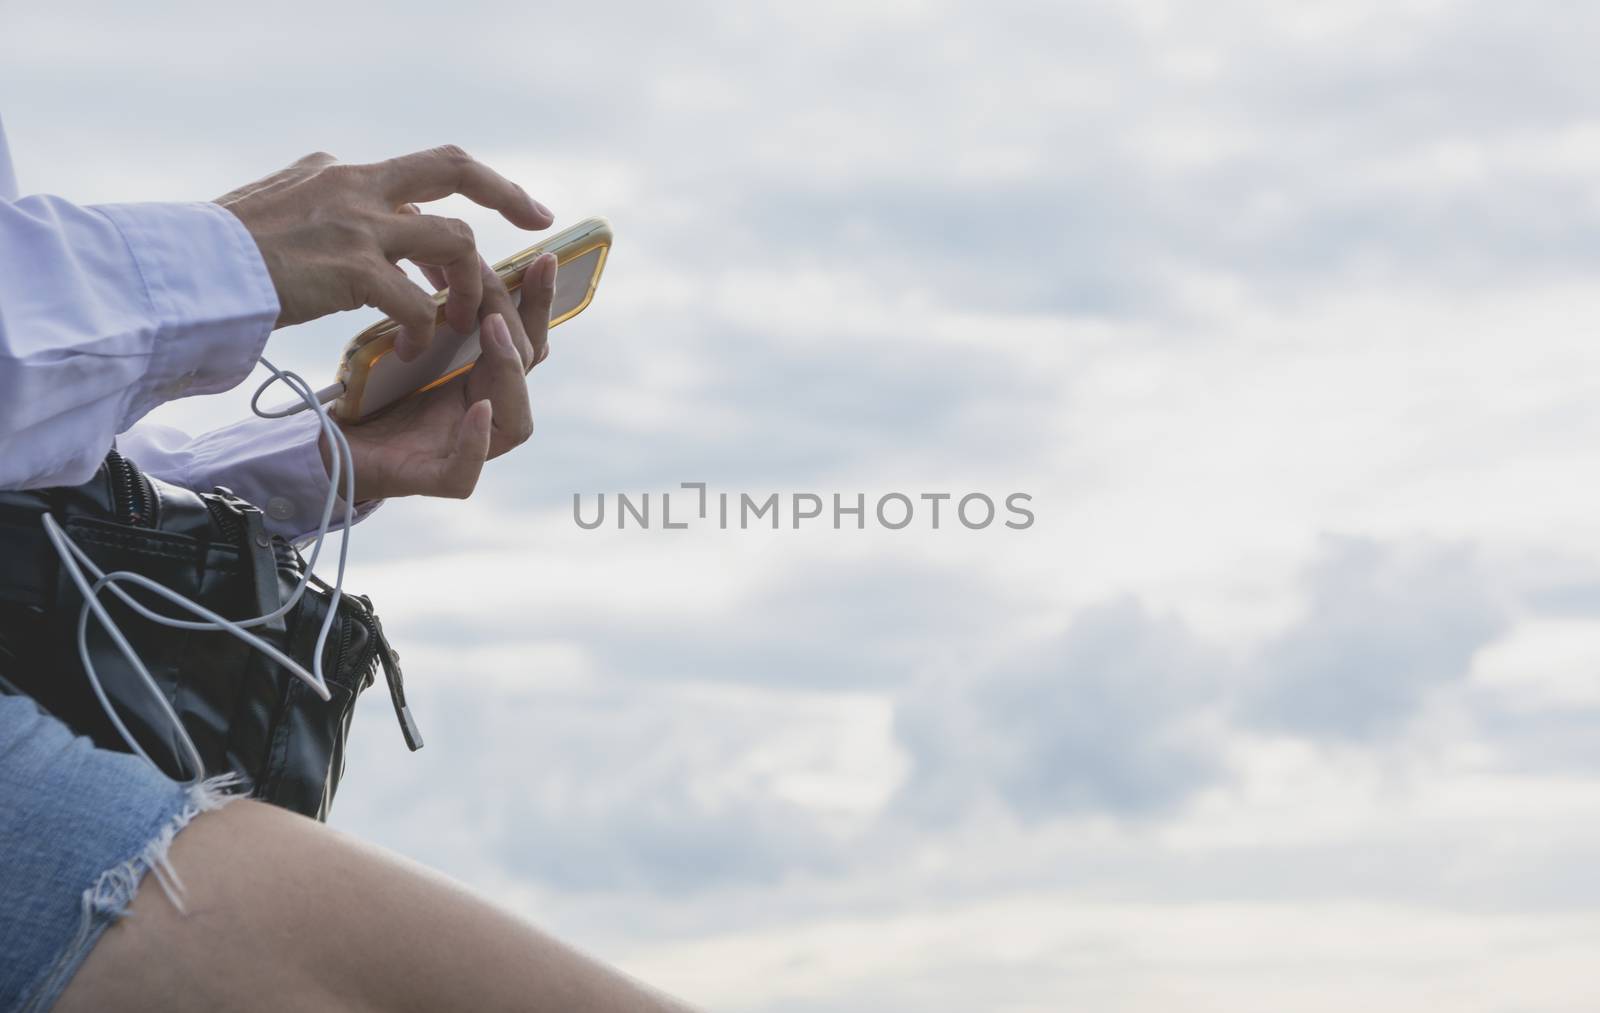 Woman using smartphone, personal chat, and social media under the sky.